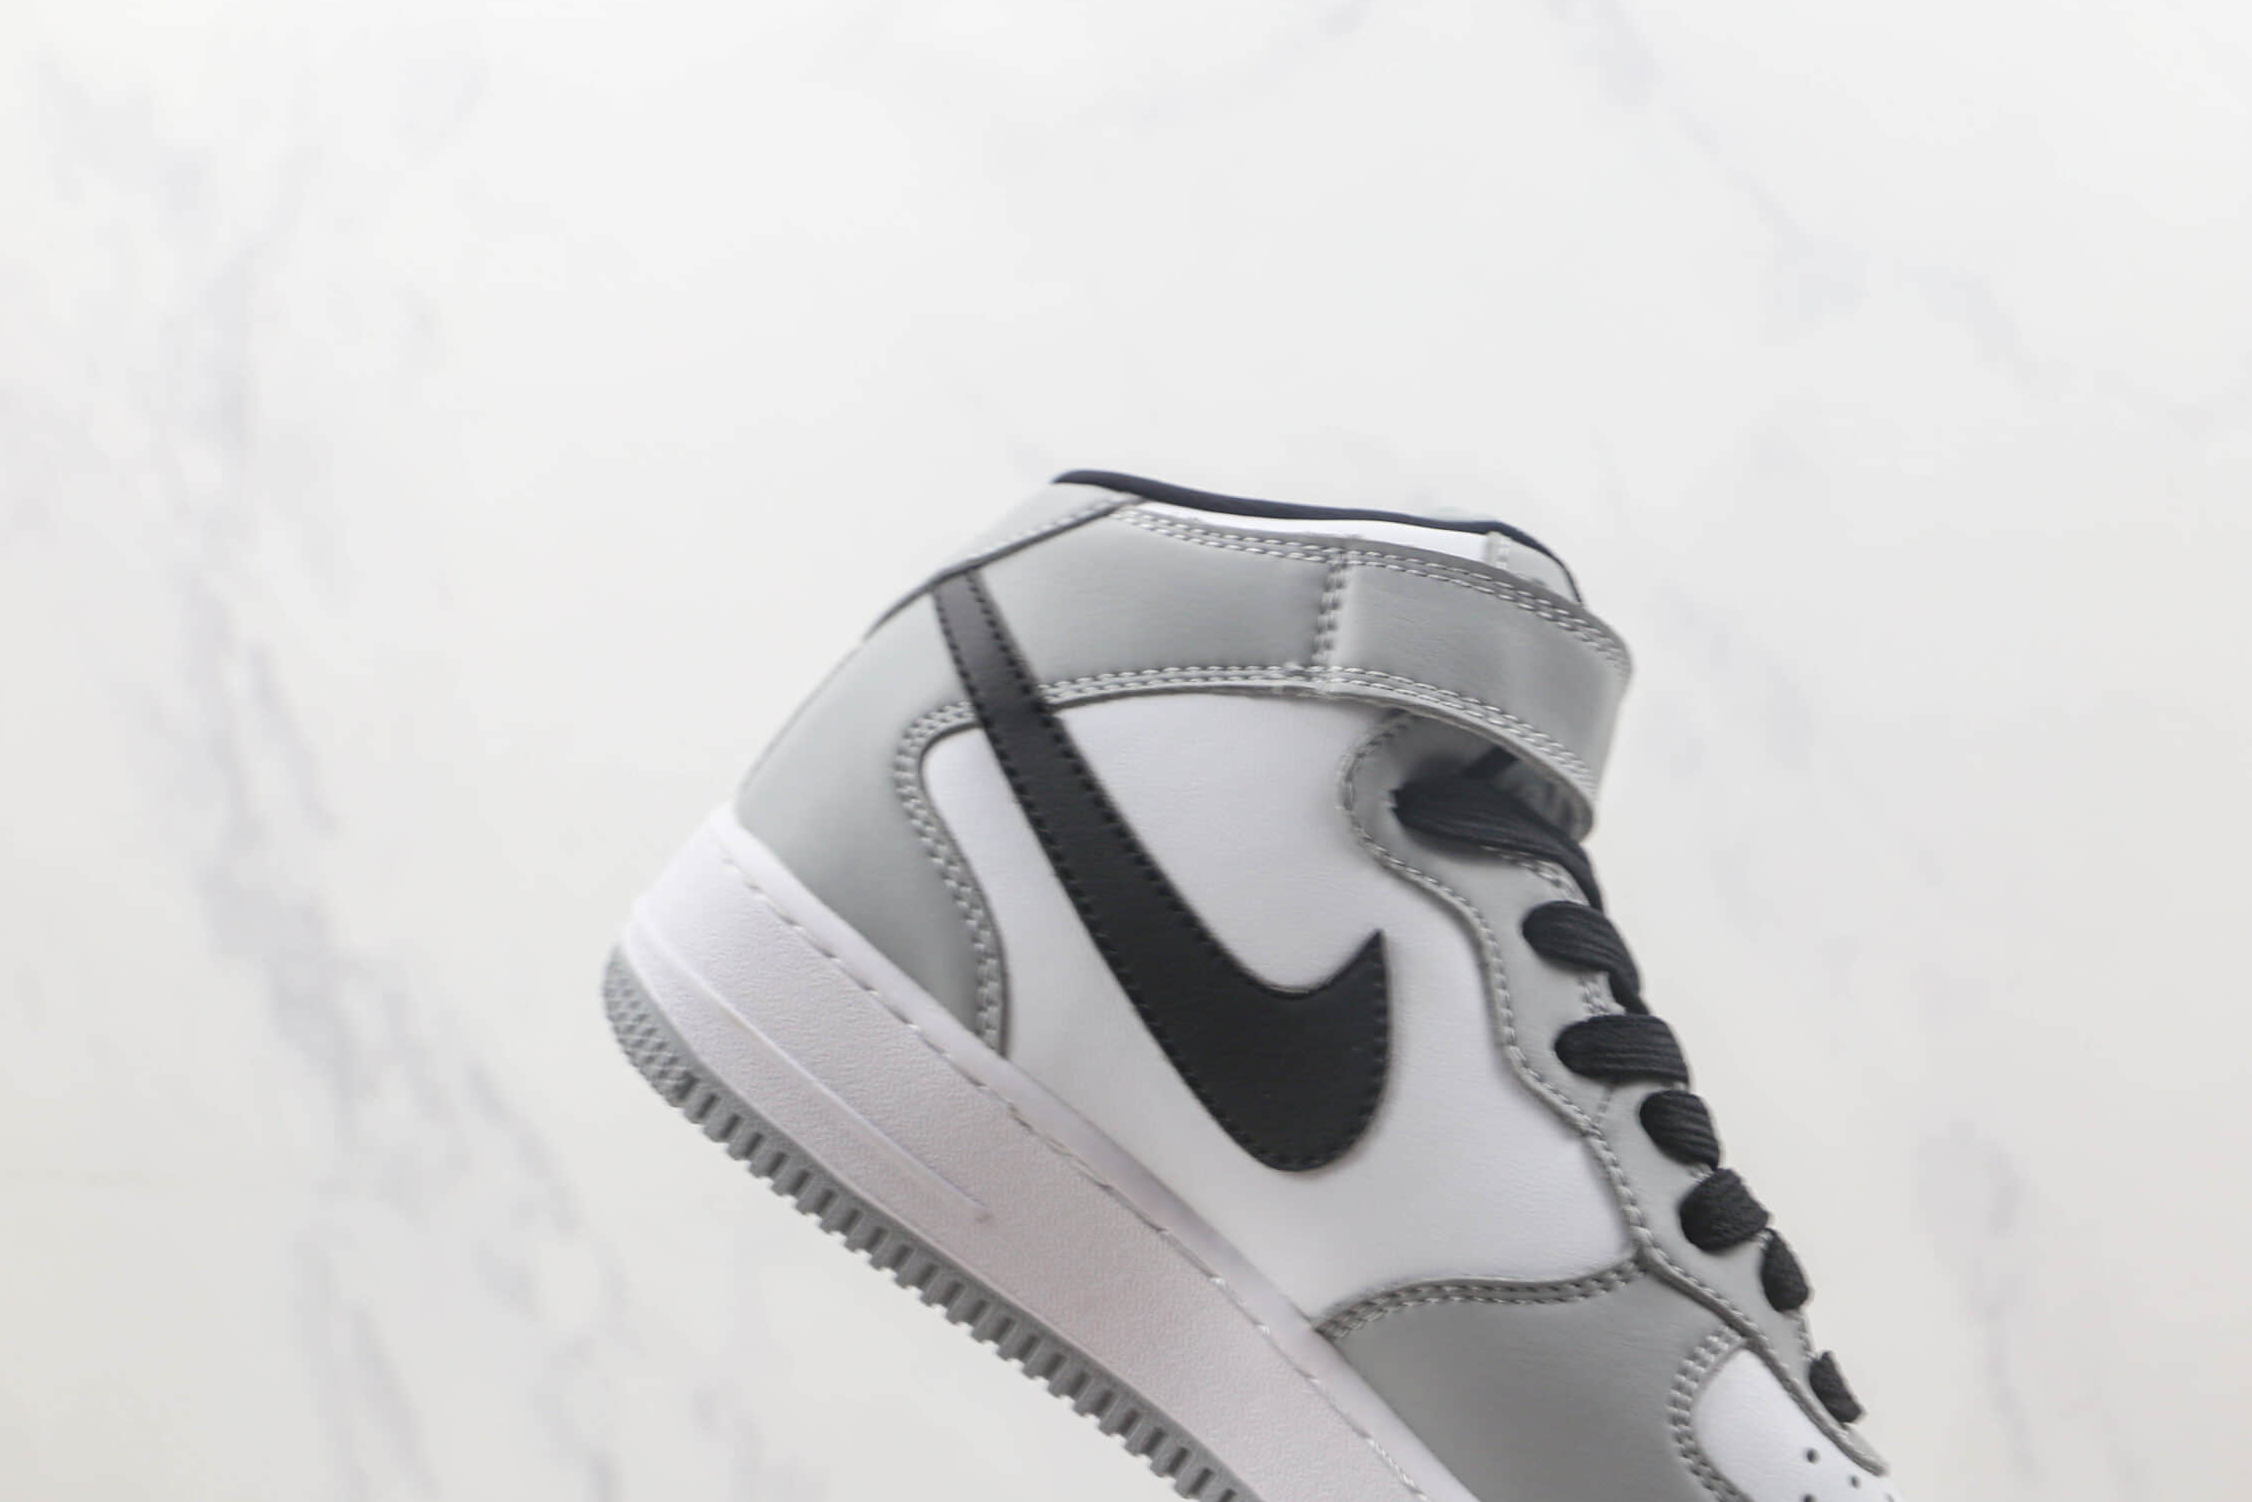 Nike Air Force 1 07 Mid Grey Black White HG1522-016 - Stylish and Versatile Sneakers for Men